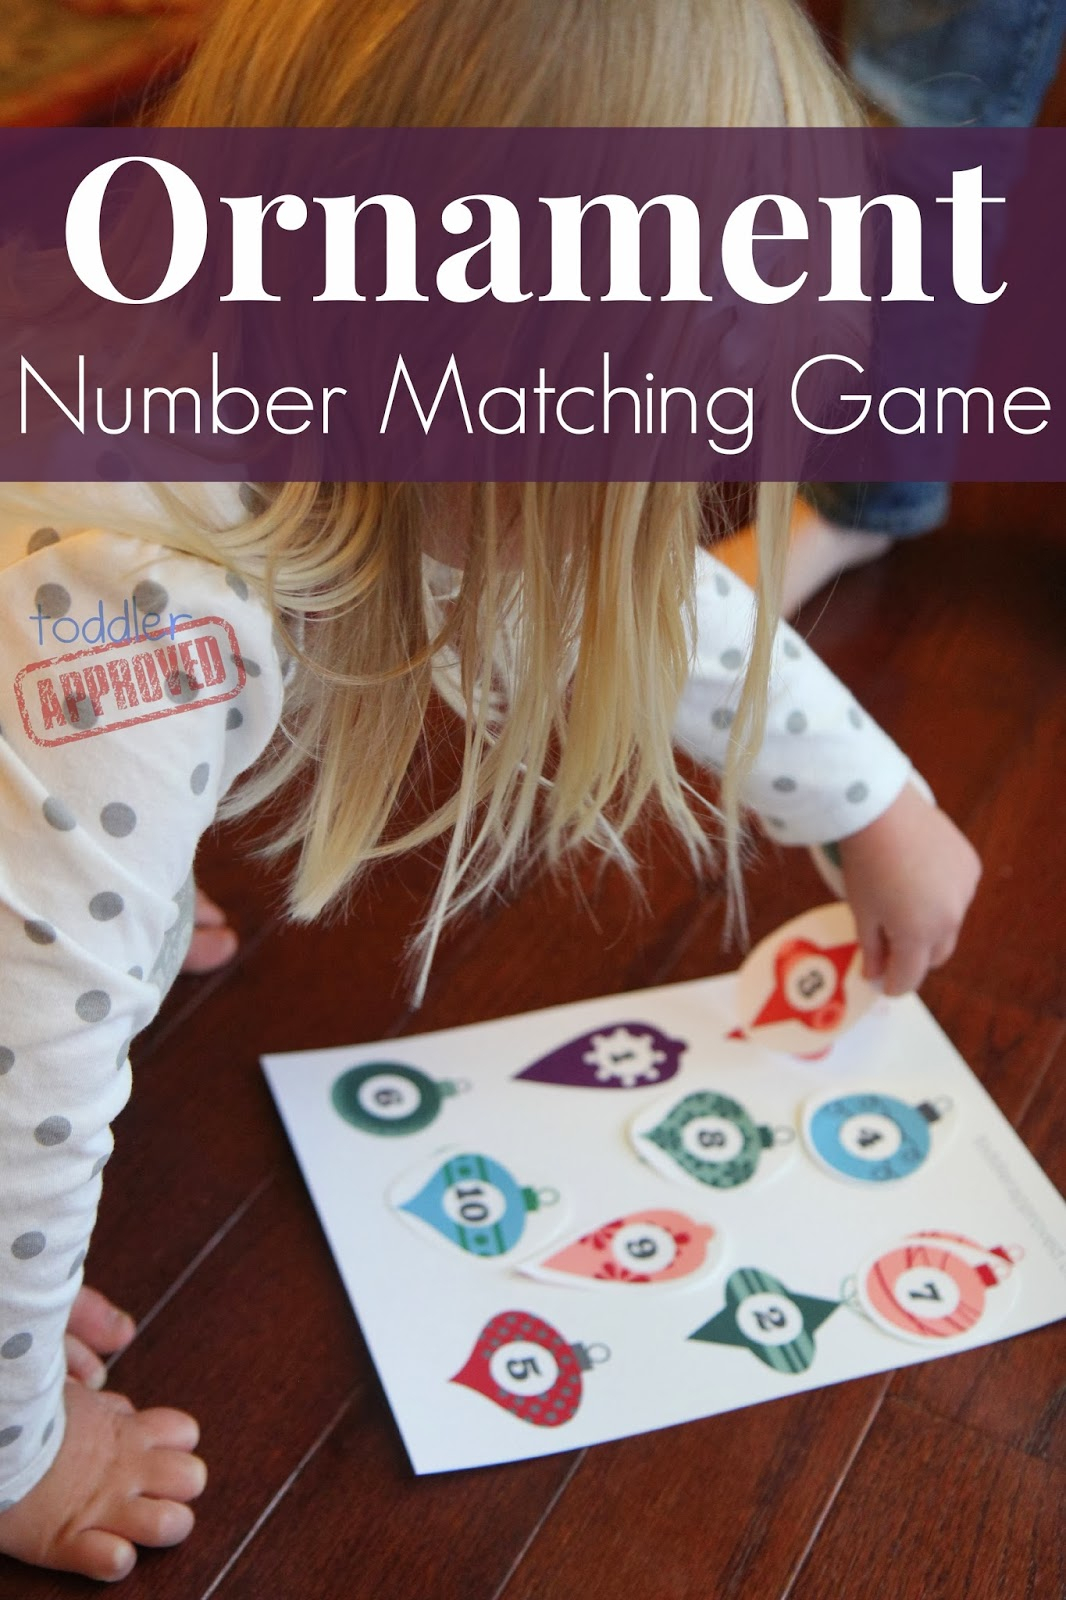 Toddler Approved!: Ornament Number Matching Game {+ Free Printable} - Free Printable Toddler Matching Games